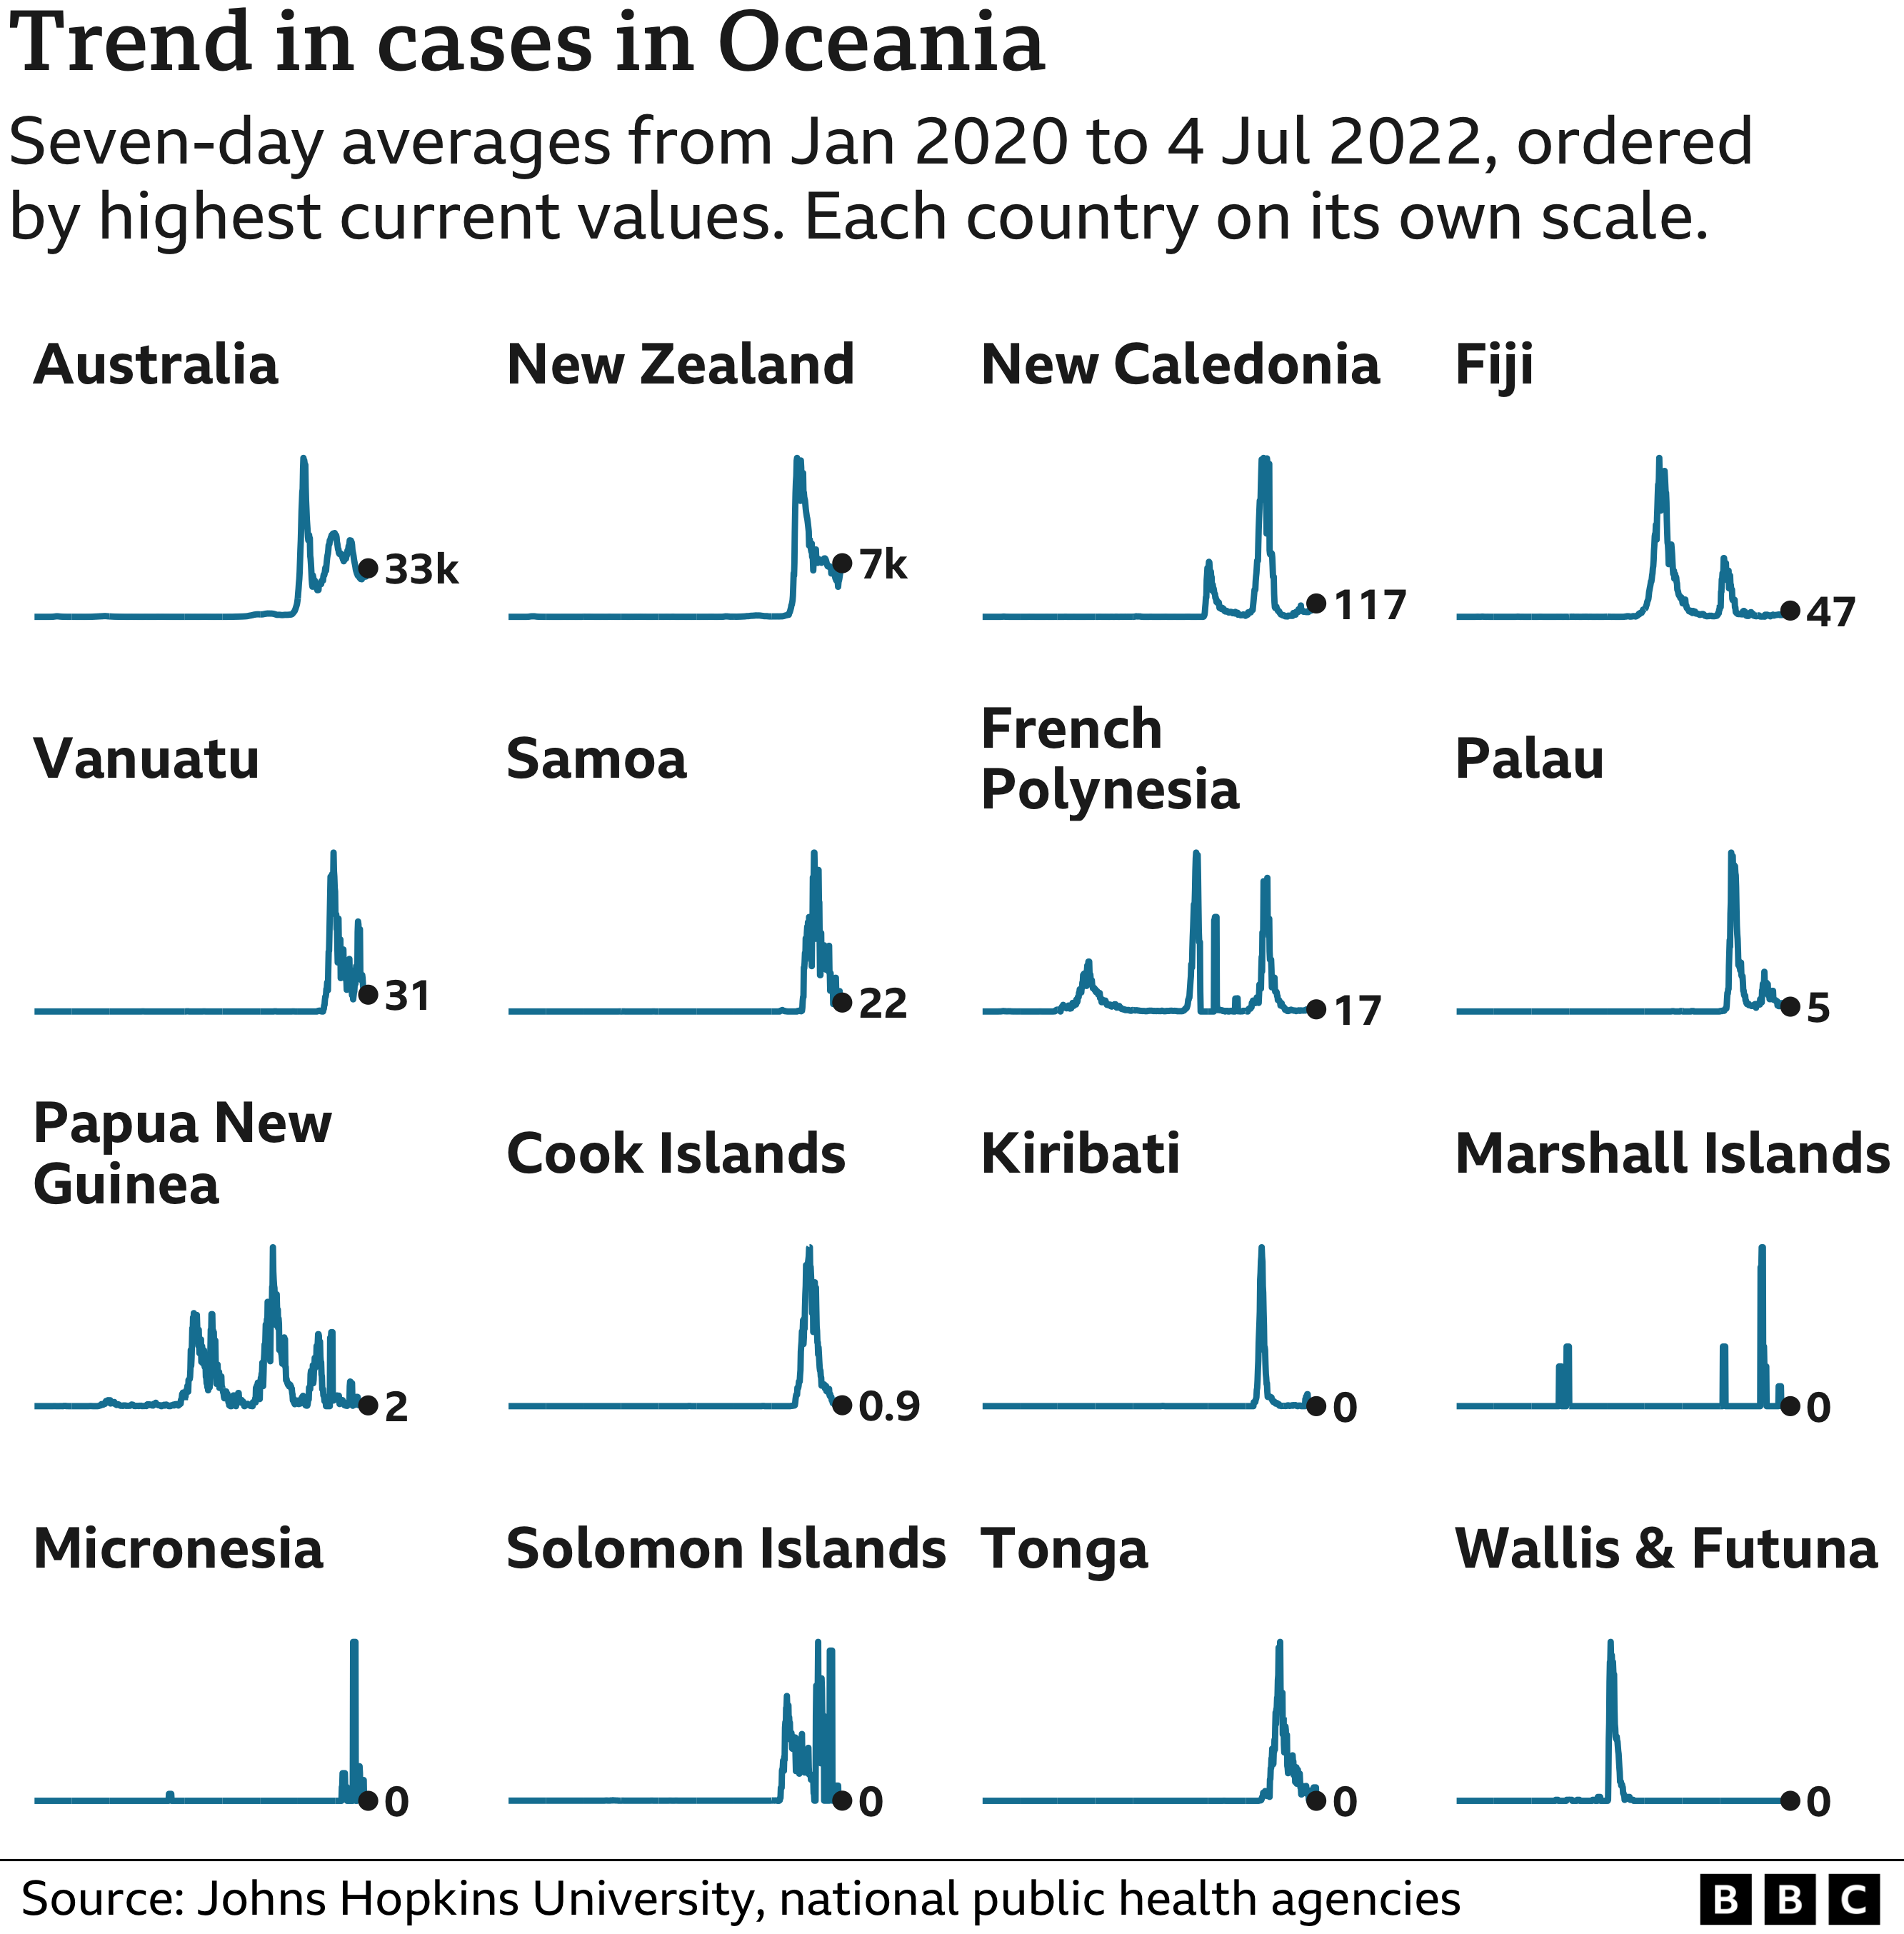 Trend in cases chart for countries in Oceania